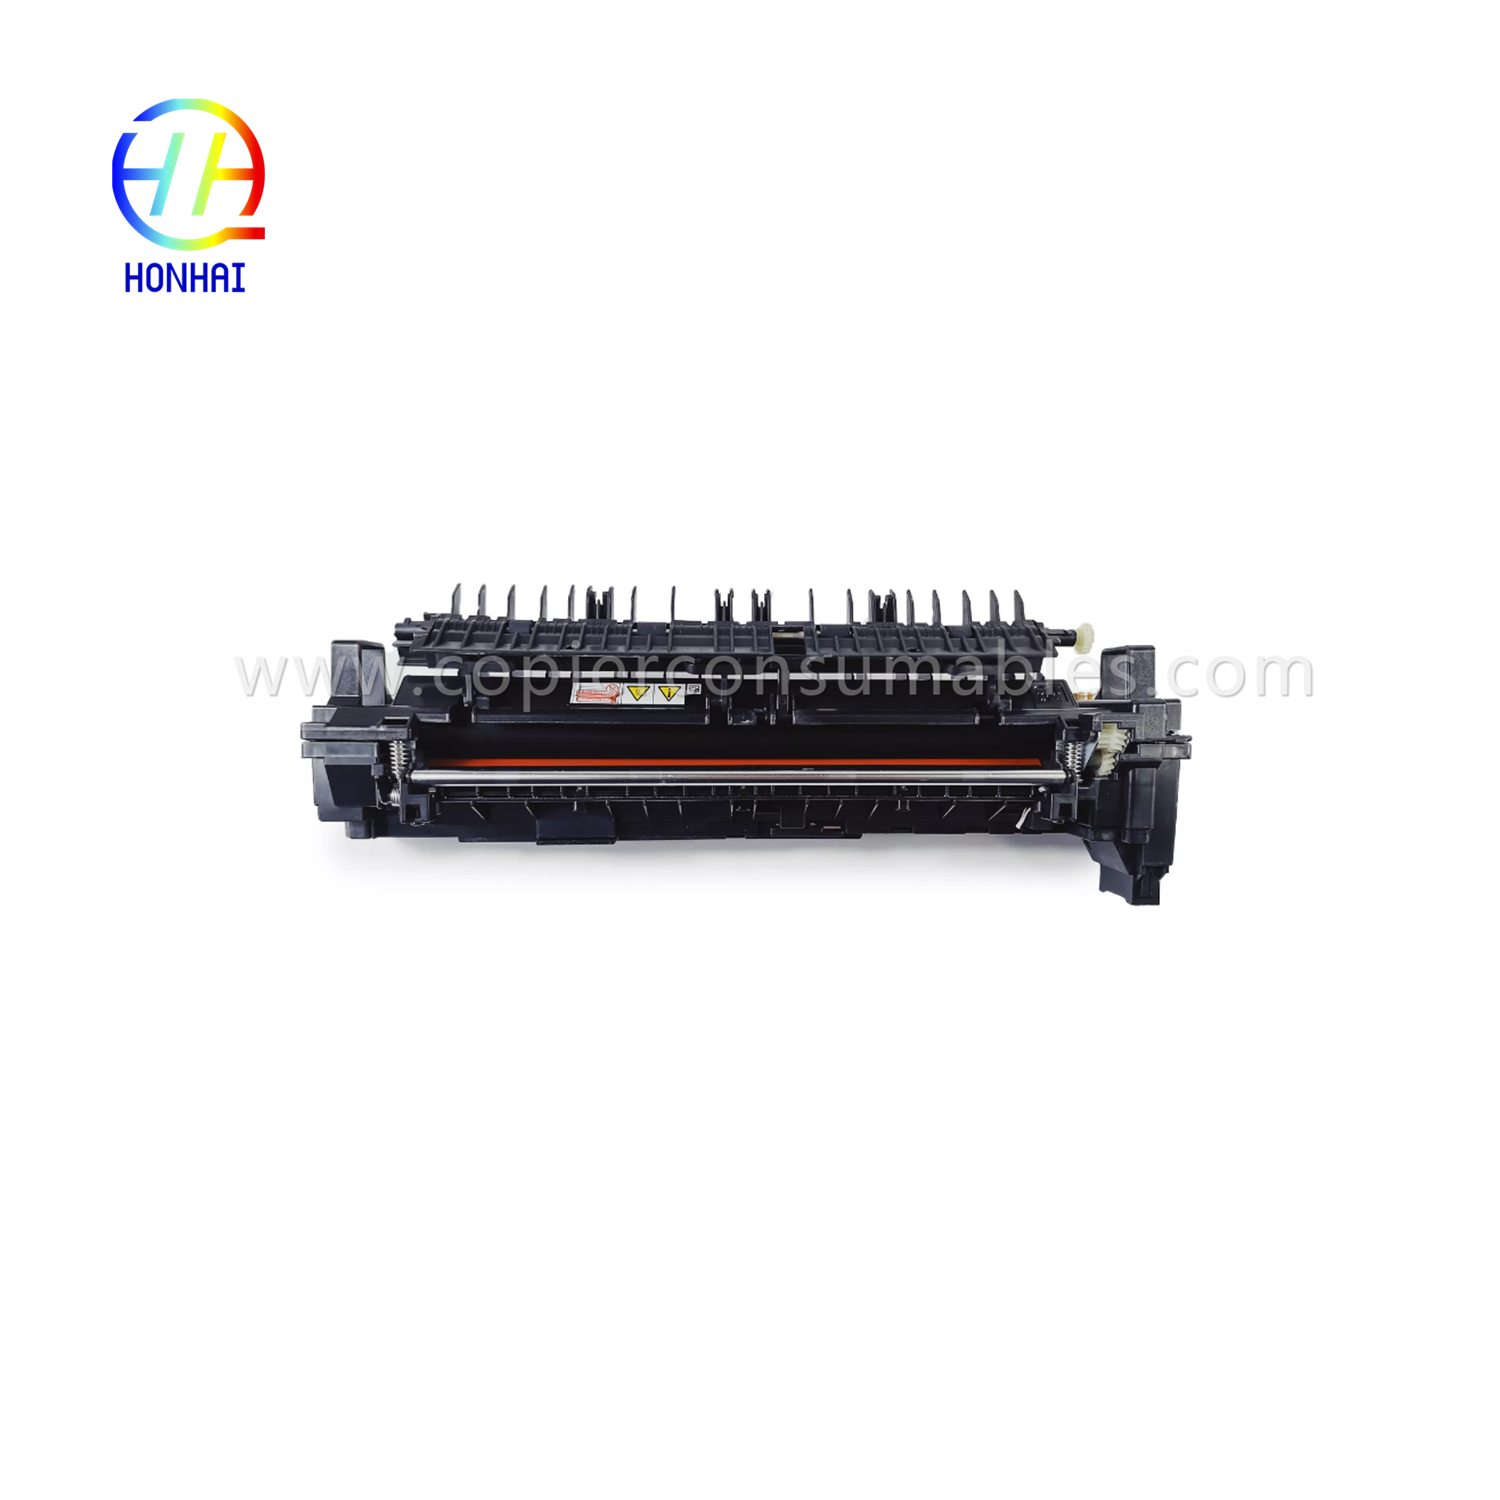 https://www.copierhonhaitech.com/fuser-unit-110v-and-220v-aseembly-for-xerox-7020-7025-7030-115r00115-product/